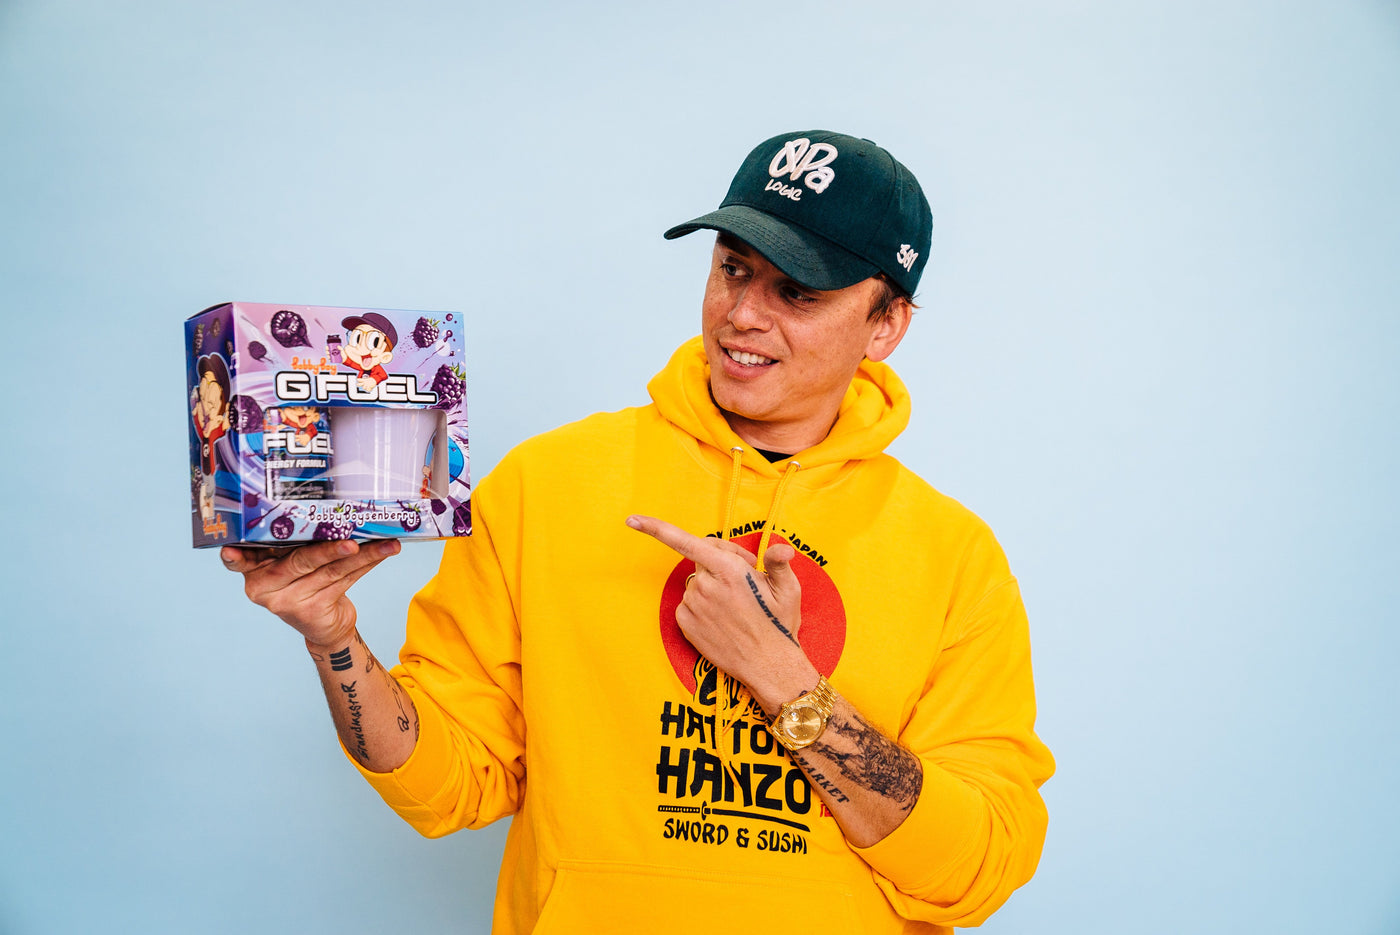 Logic is wearing a yellow hoodie and No Pressure hat, and holding a limited-edition G FUEL Bobby Boysenberry Collectors Box, which includes one 40-serving tub and one 16 oz Bobby Boy shaker cup.